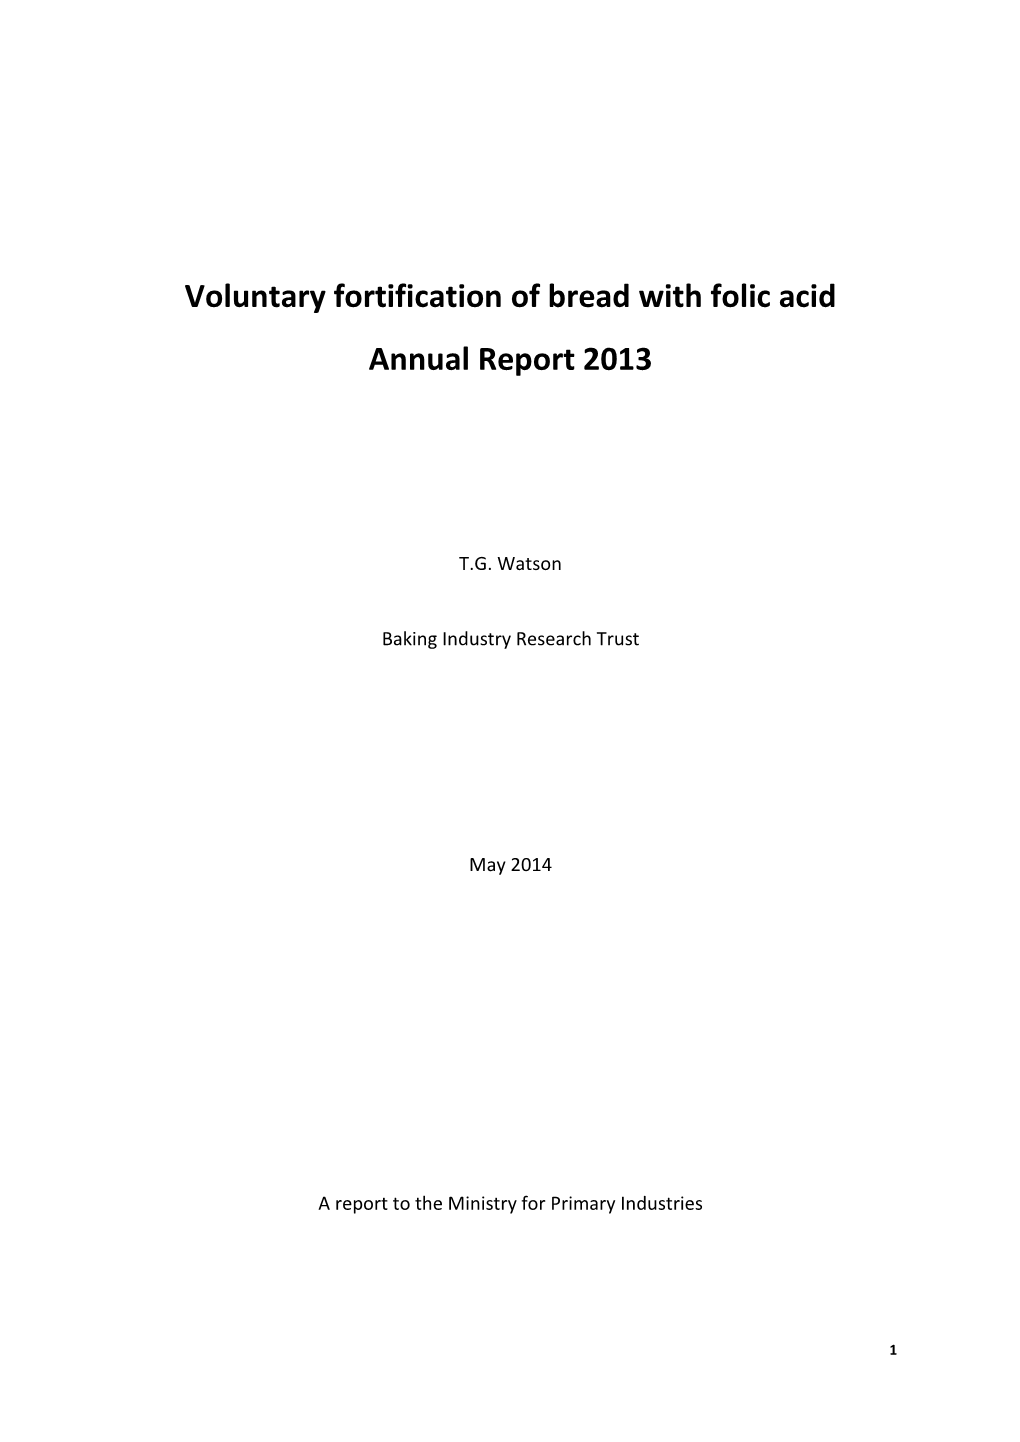 Voluntary Fortification of Bread with Folic Acid Annual Report 2013